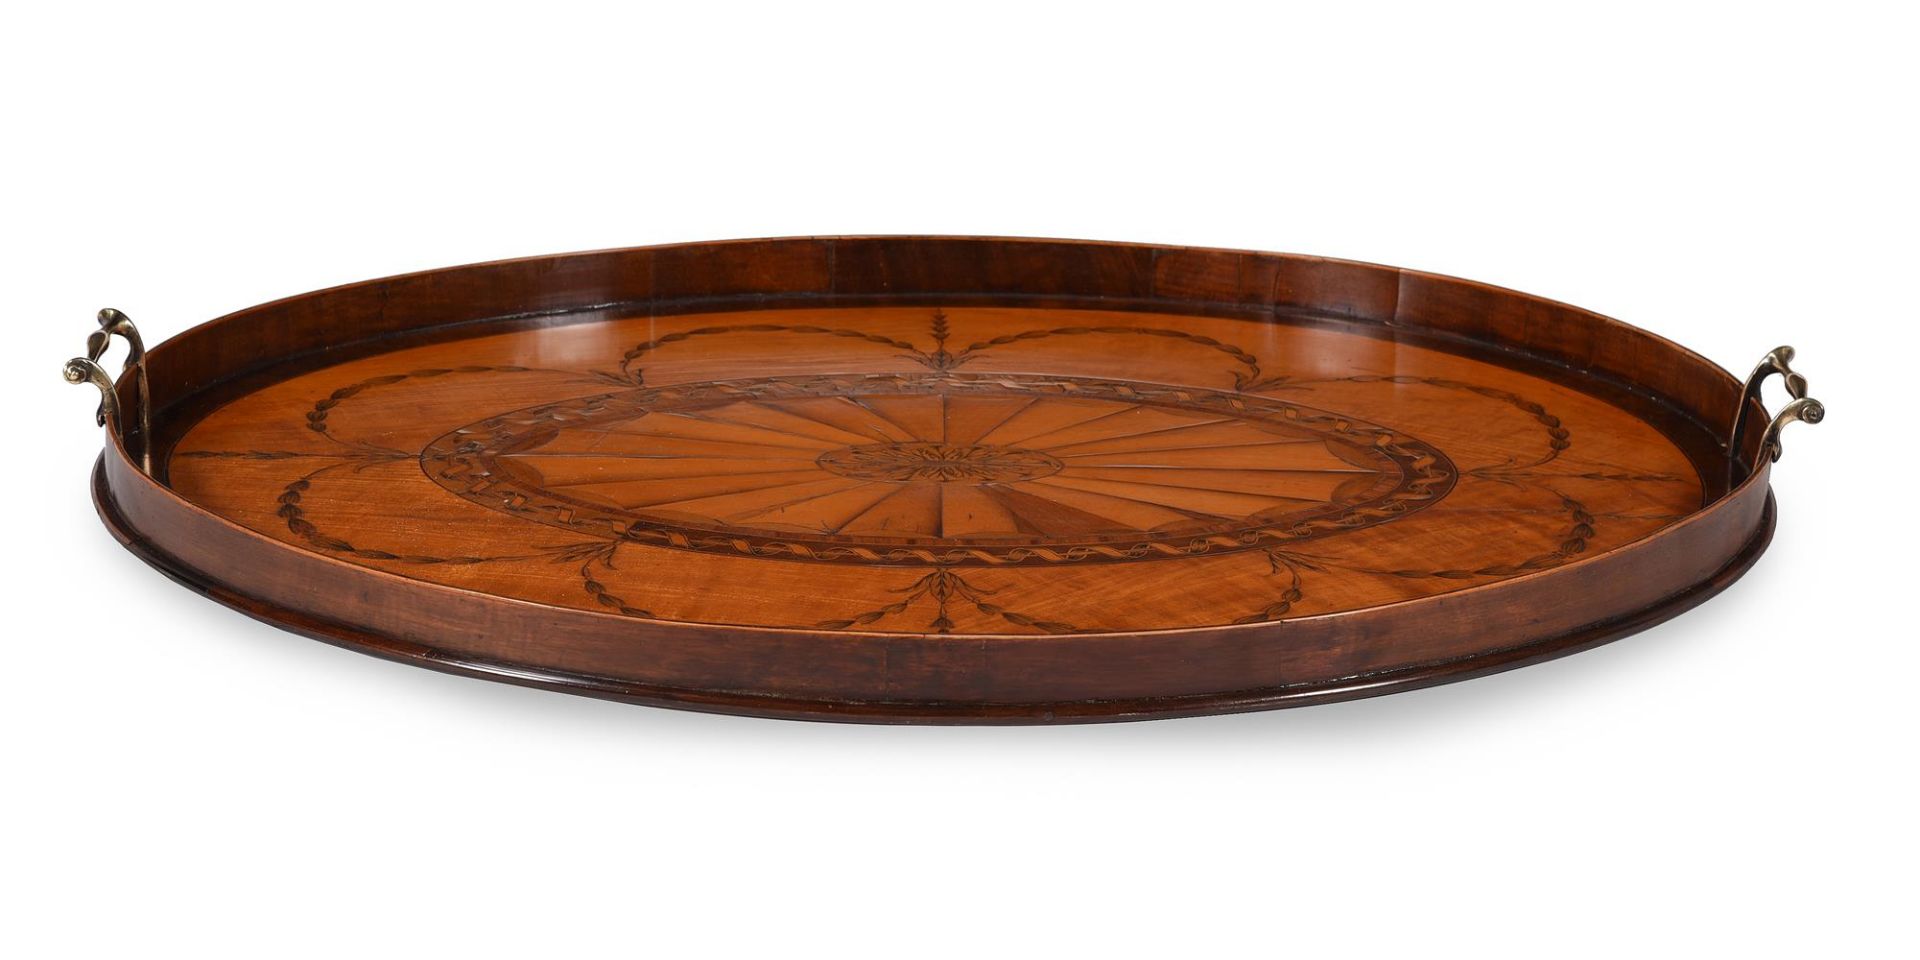 A GEORGE III SATINWOOD AND MARQUETRY INLAID OVAL TRAY, ATTRIBUTED TO GILLOWS, CIRCA 1780 - Bild 4 aus 4